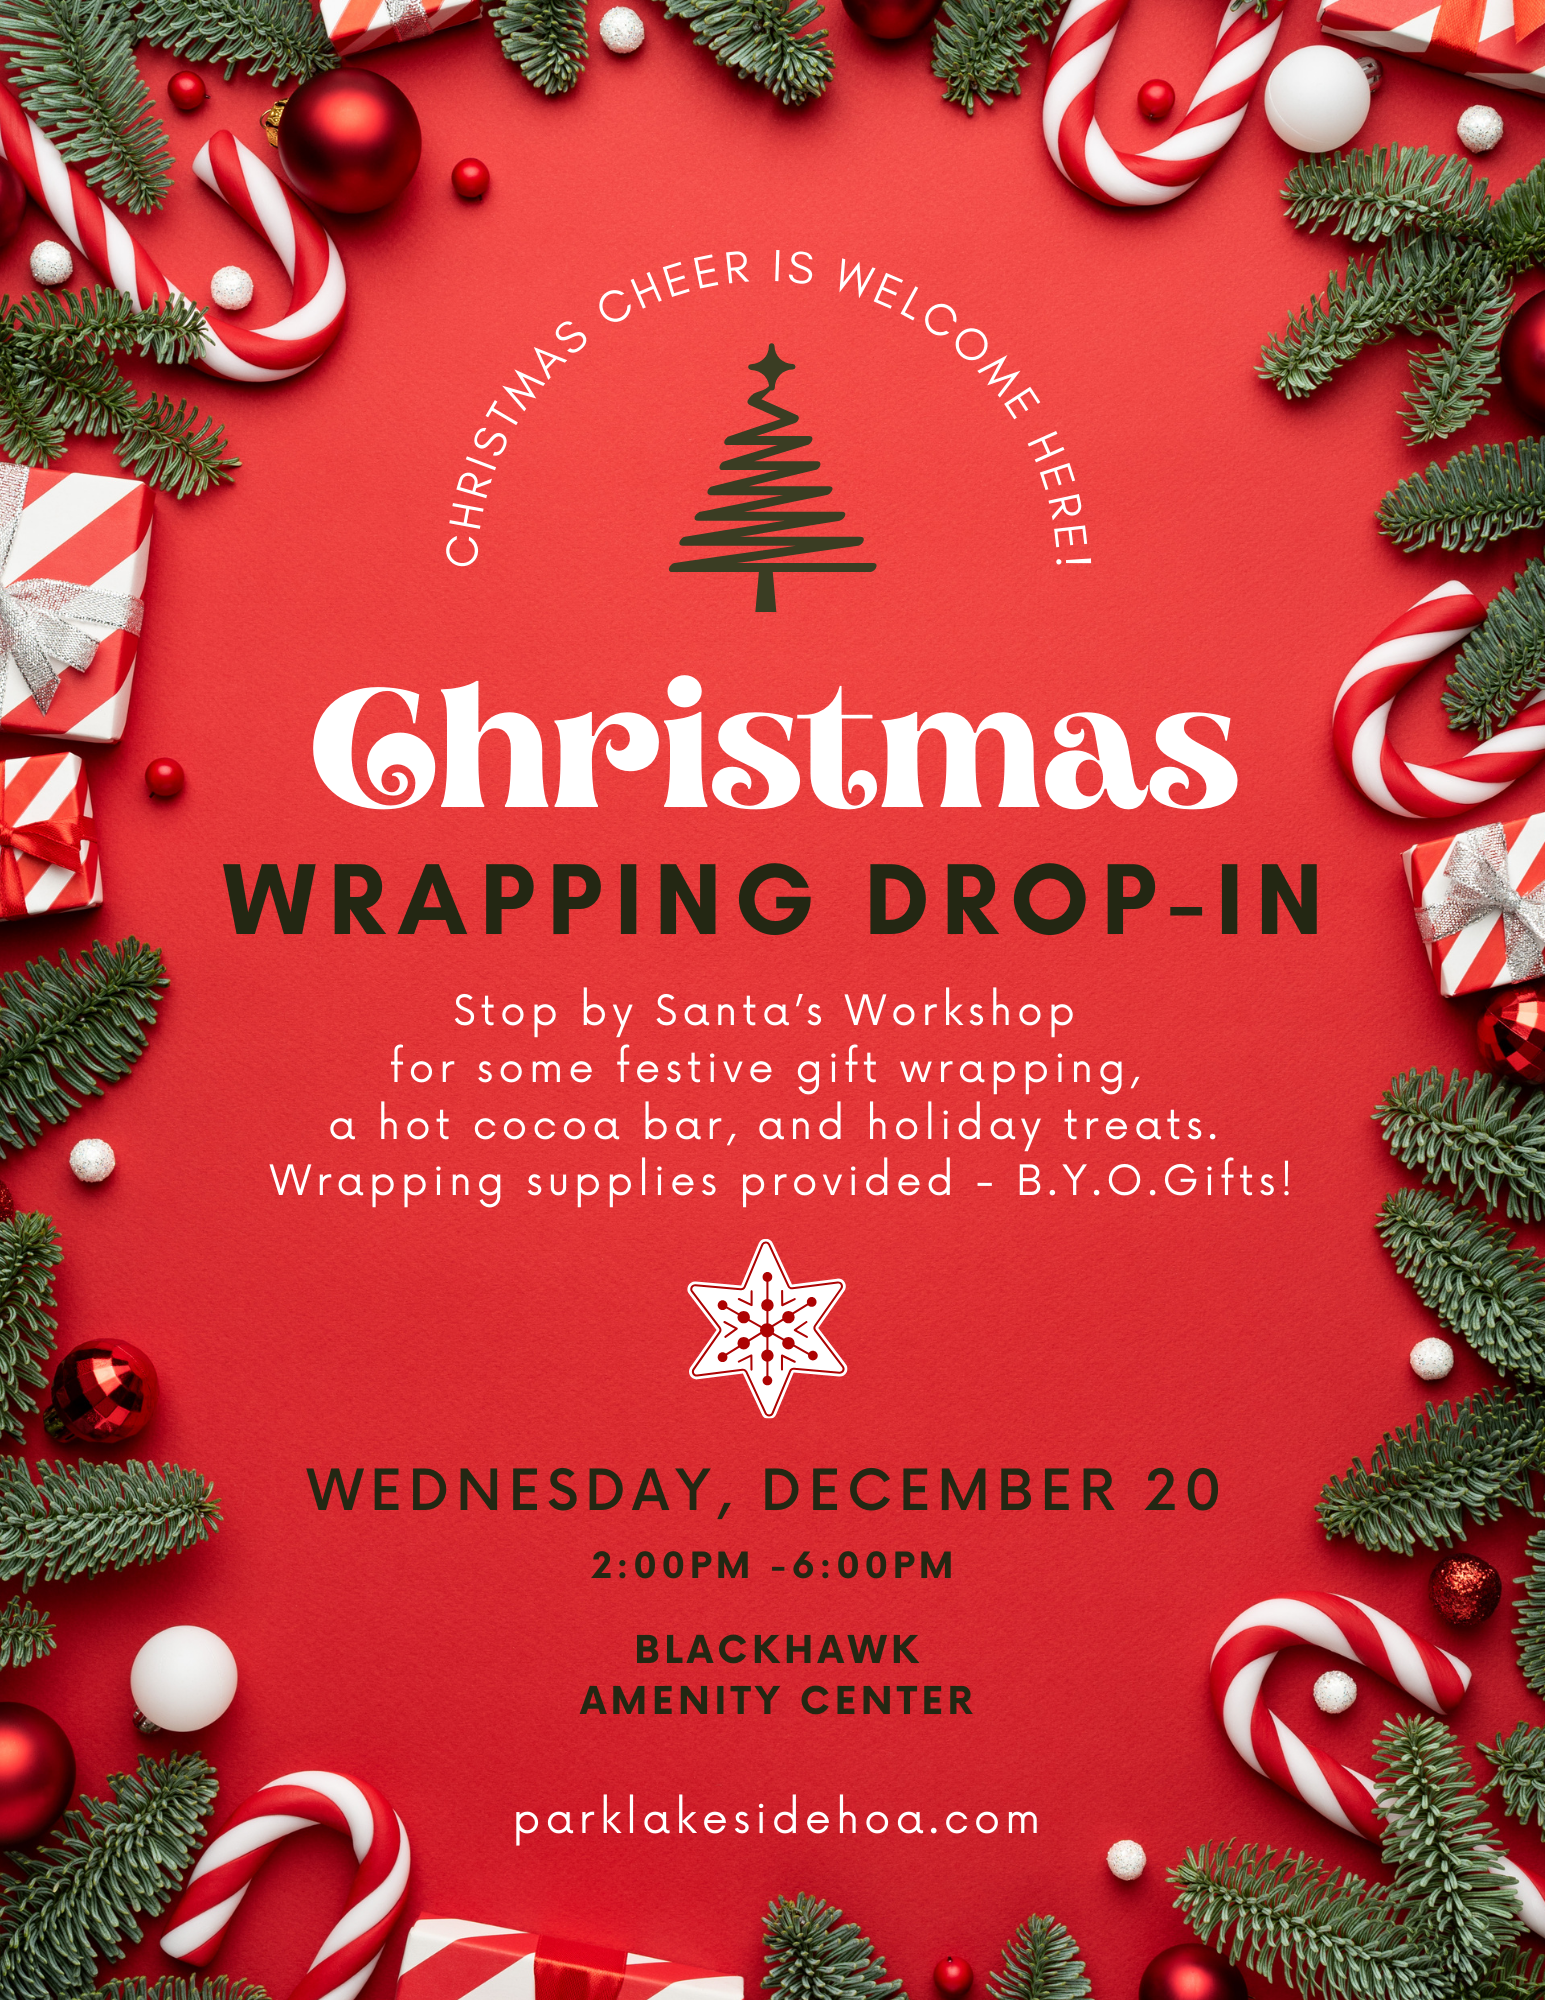 Christmas WRAPPING DROP_IN Stop by Santa's Workshop for some festive gift wrapping, a hot cocoa bar, and holiday treats. Wrapping supplies provided - B.Y.O. Gifts! WEDNESDAY, DECEMBER 20 2:00PM -6:00PM BLACKHAWK AMENITY CENTER parklakesidehoa.com